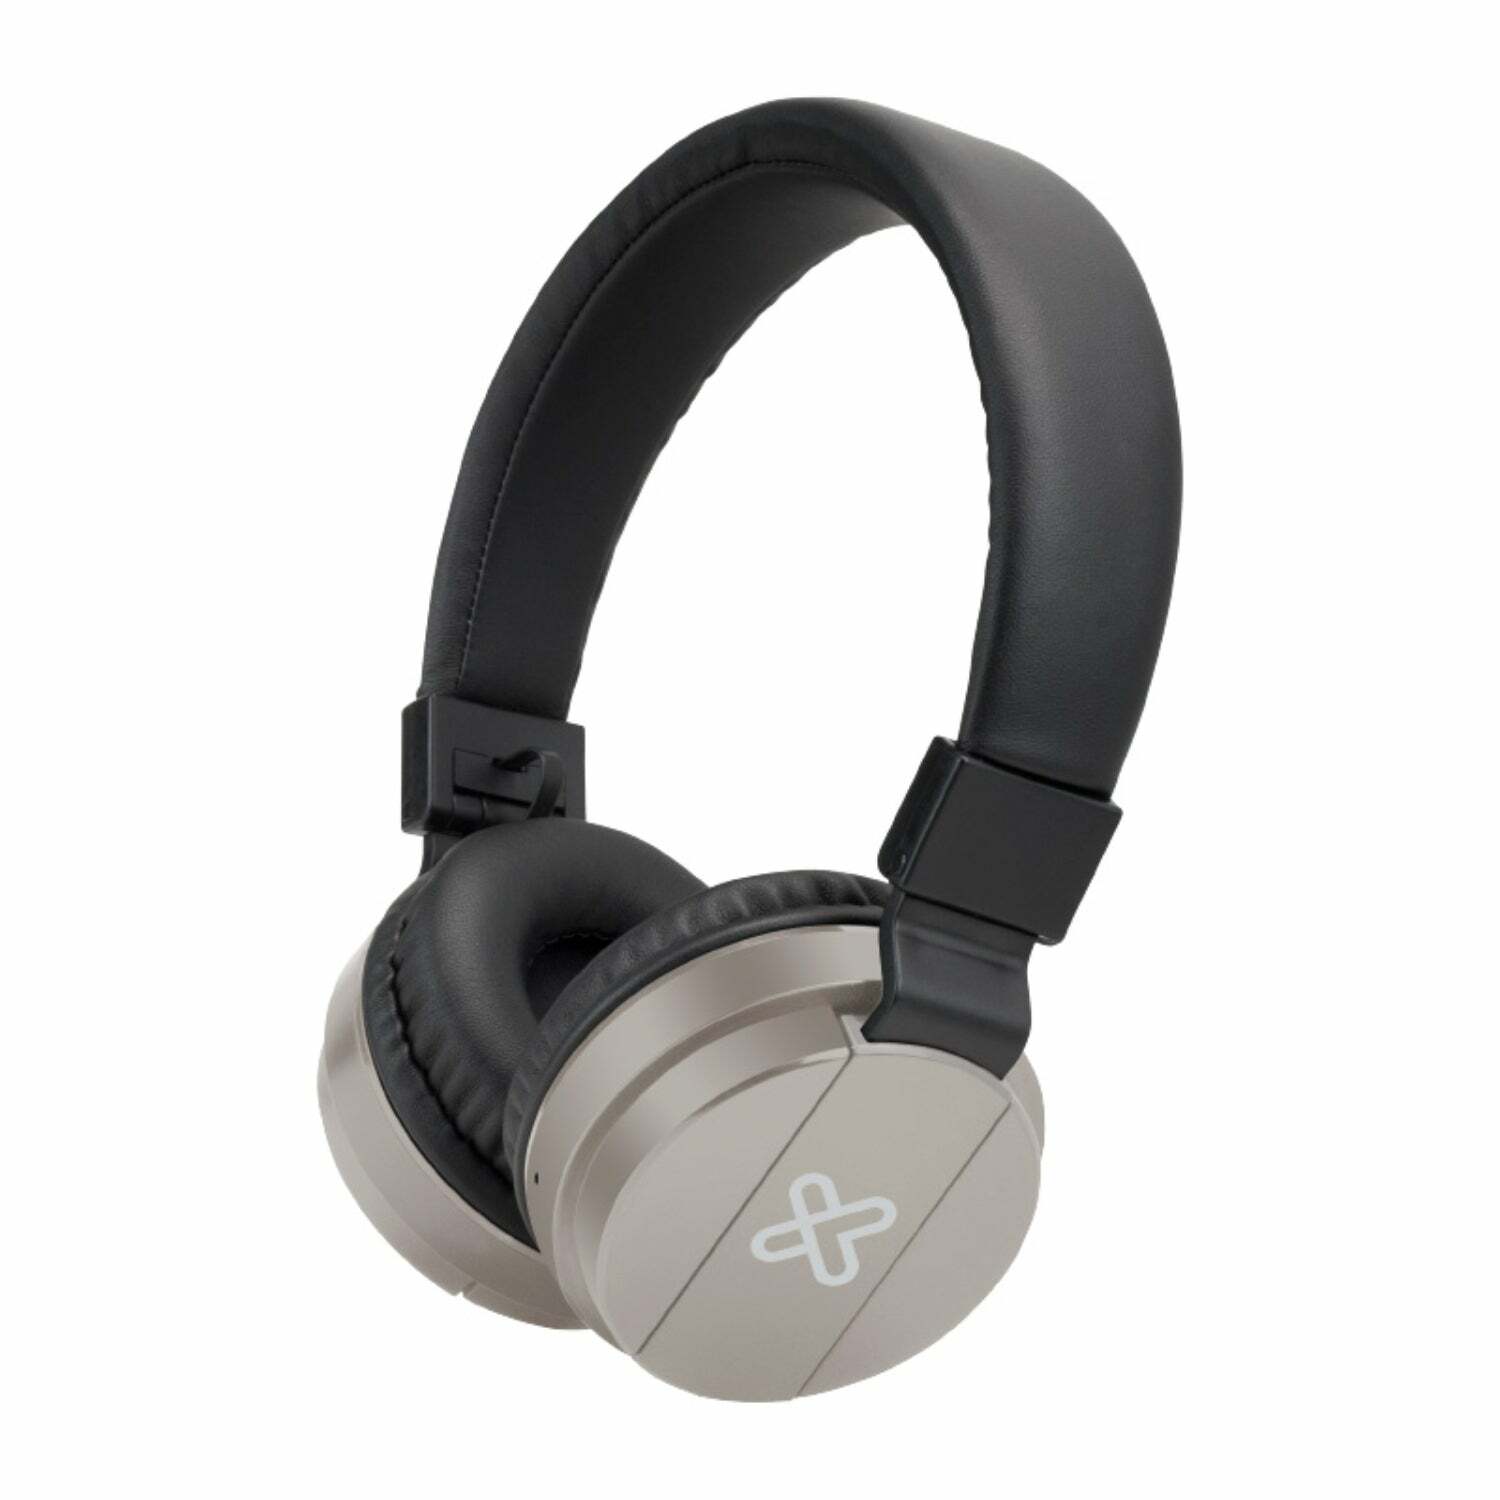 Klip Xtreme Fury PRO KWH-001 Headphones with Wireless Bluetooth Technology - Silver